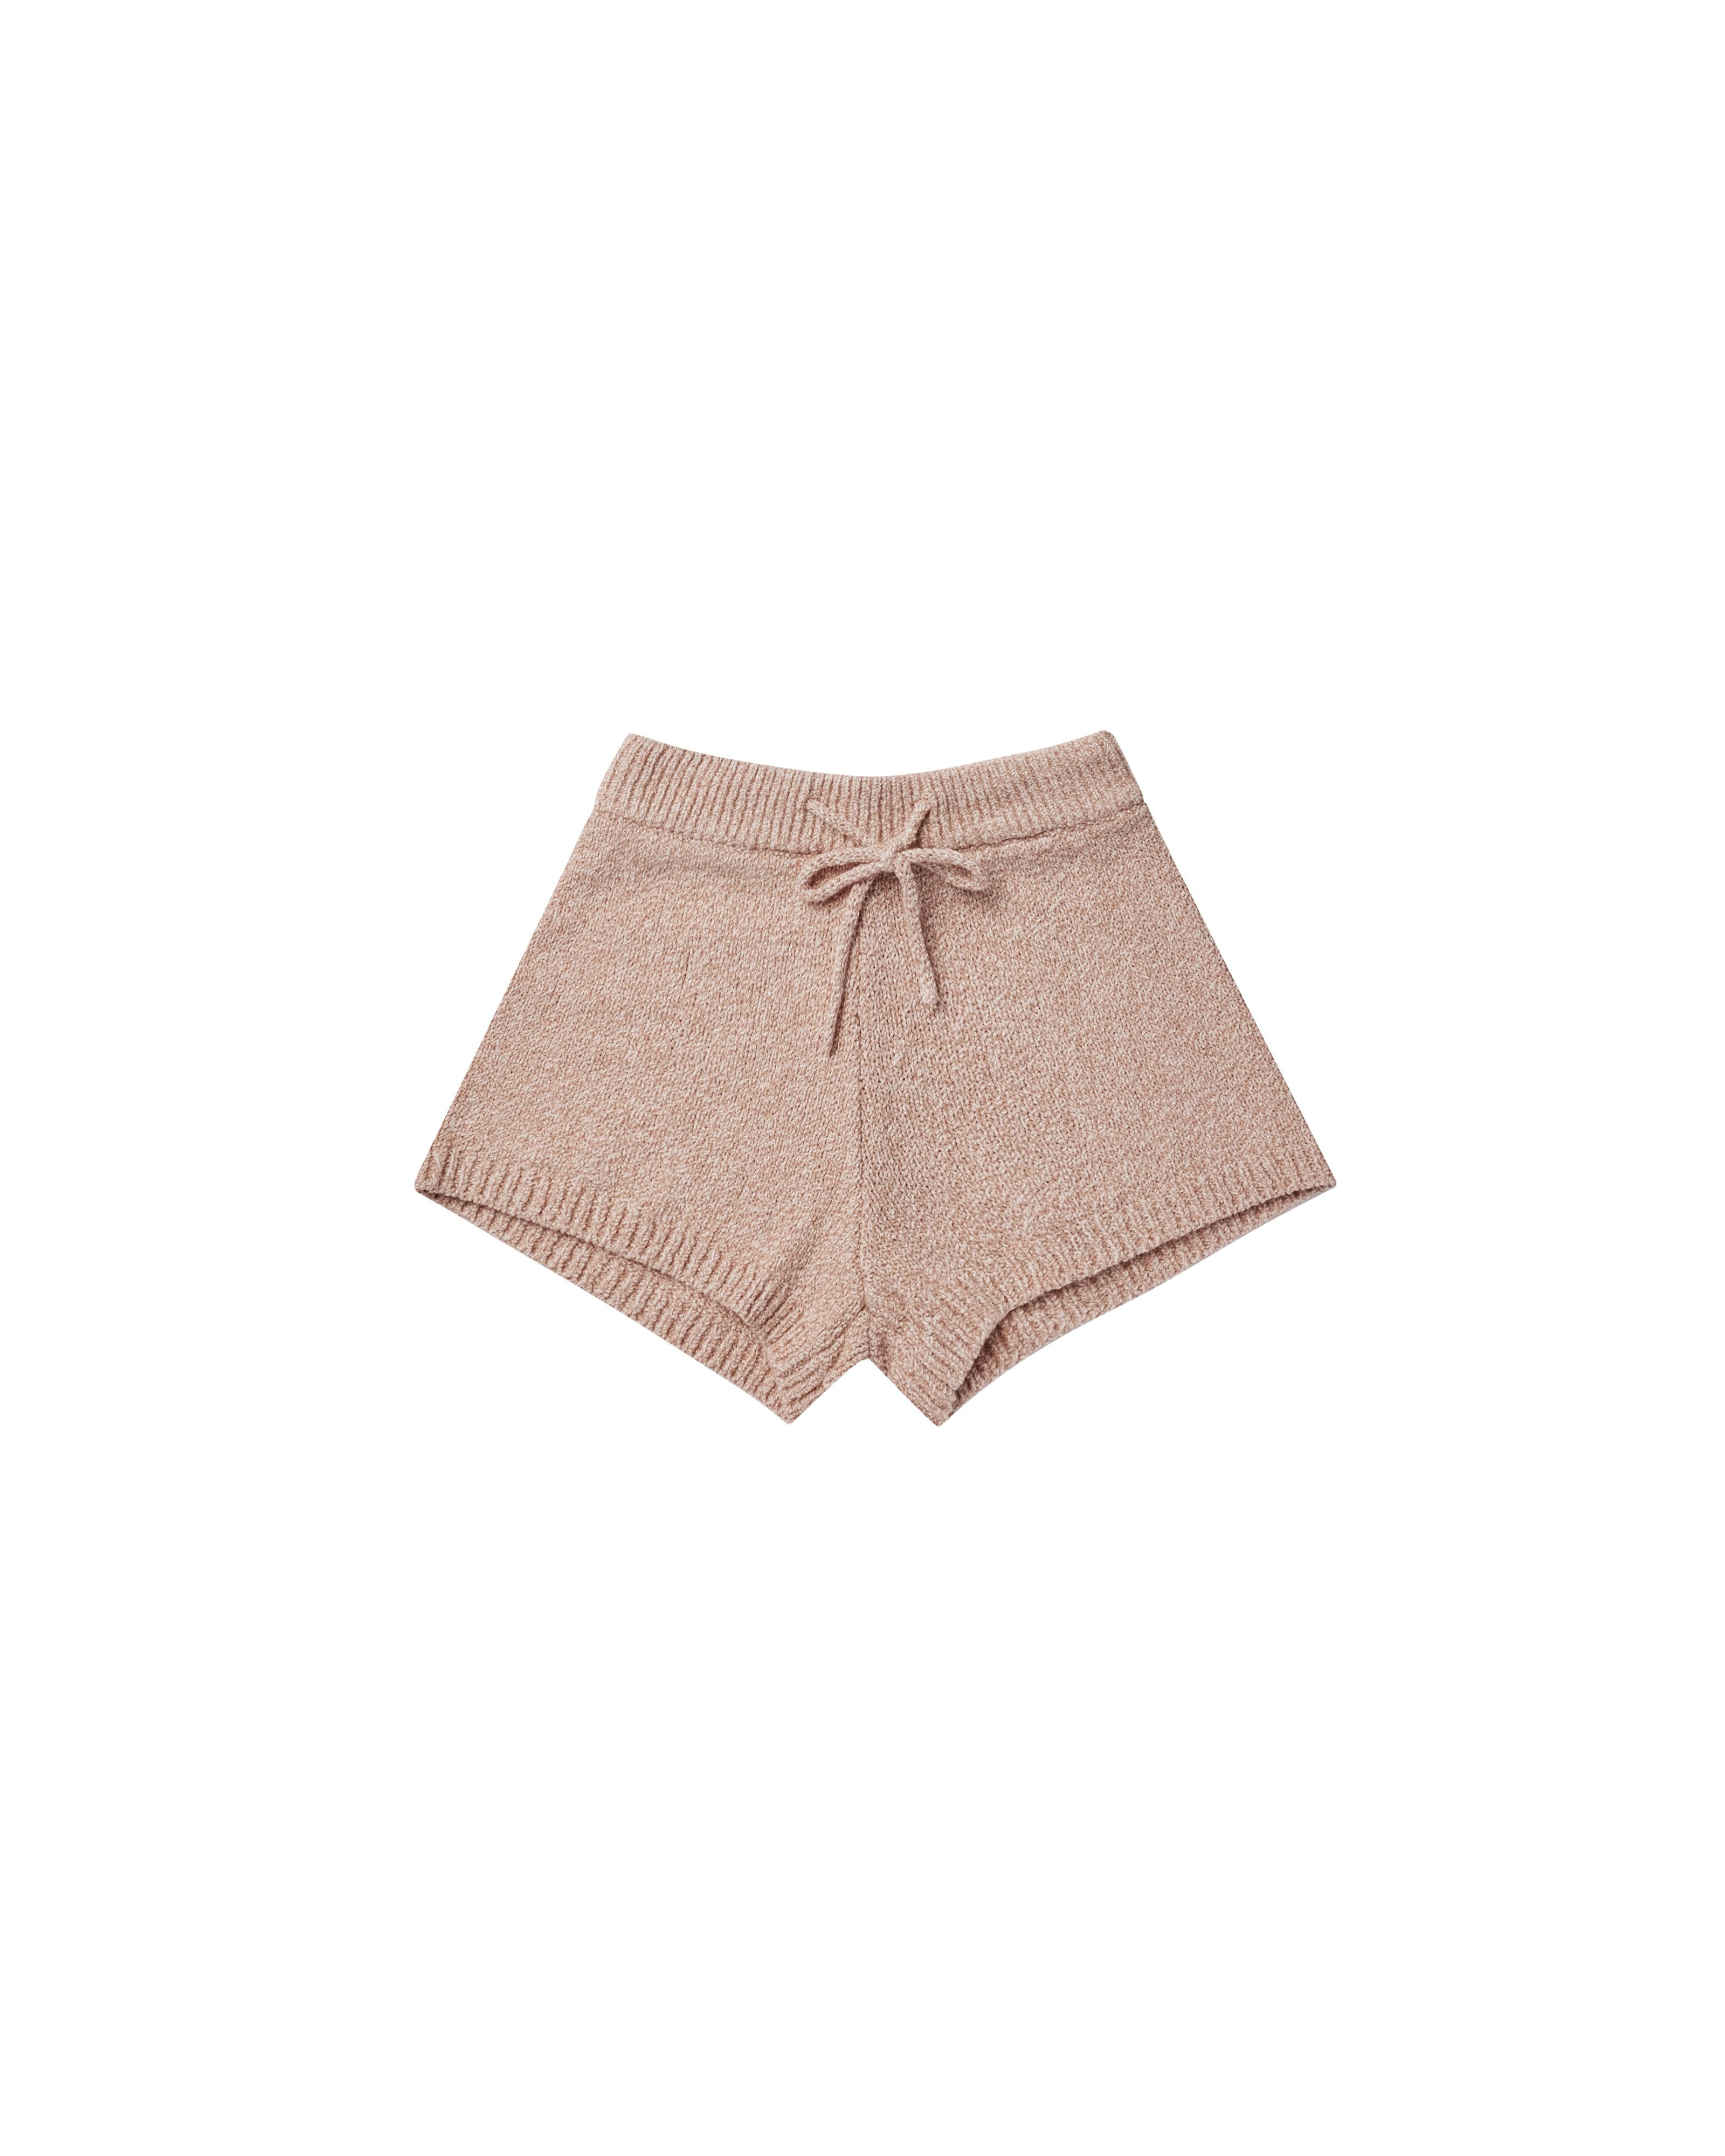 Rylee & Cru - AW22 - Heathered Rose Knit Shorts - Sweet E's Children's ...